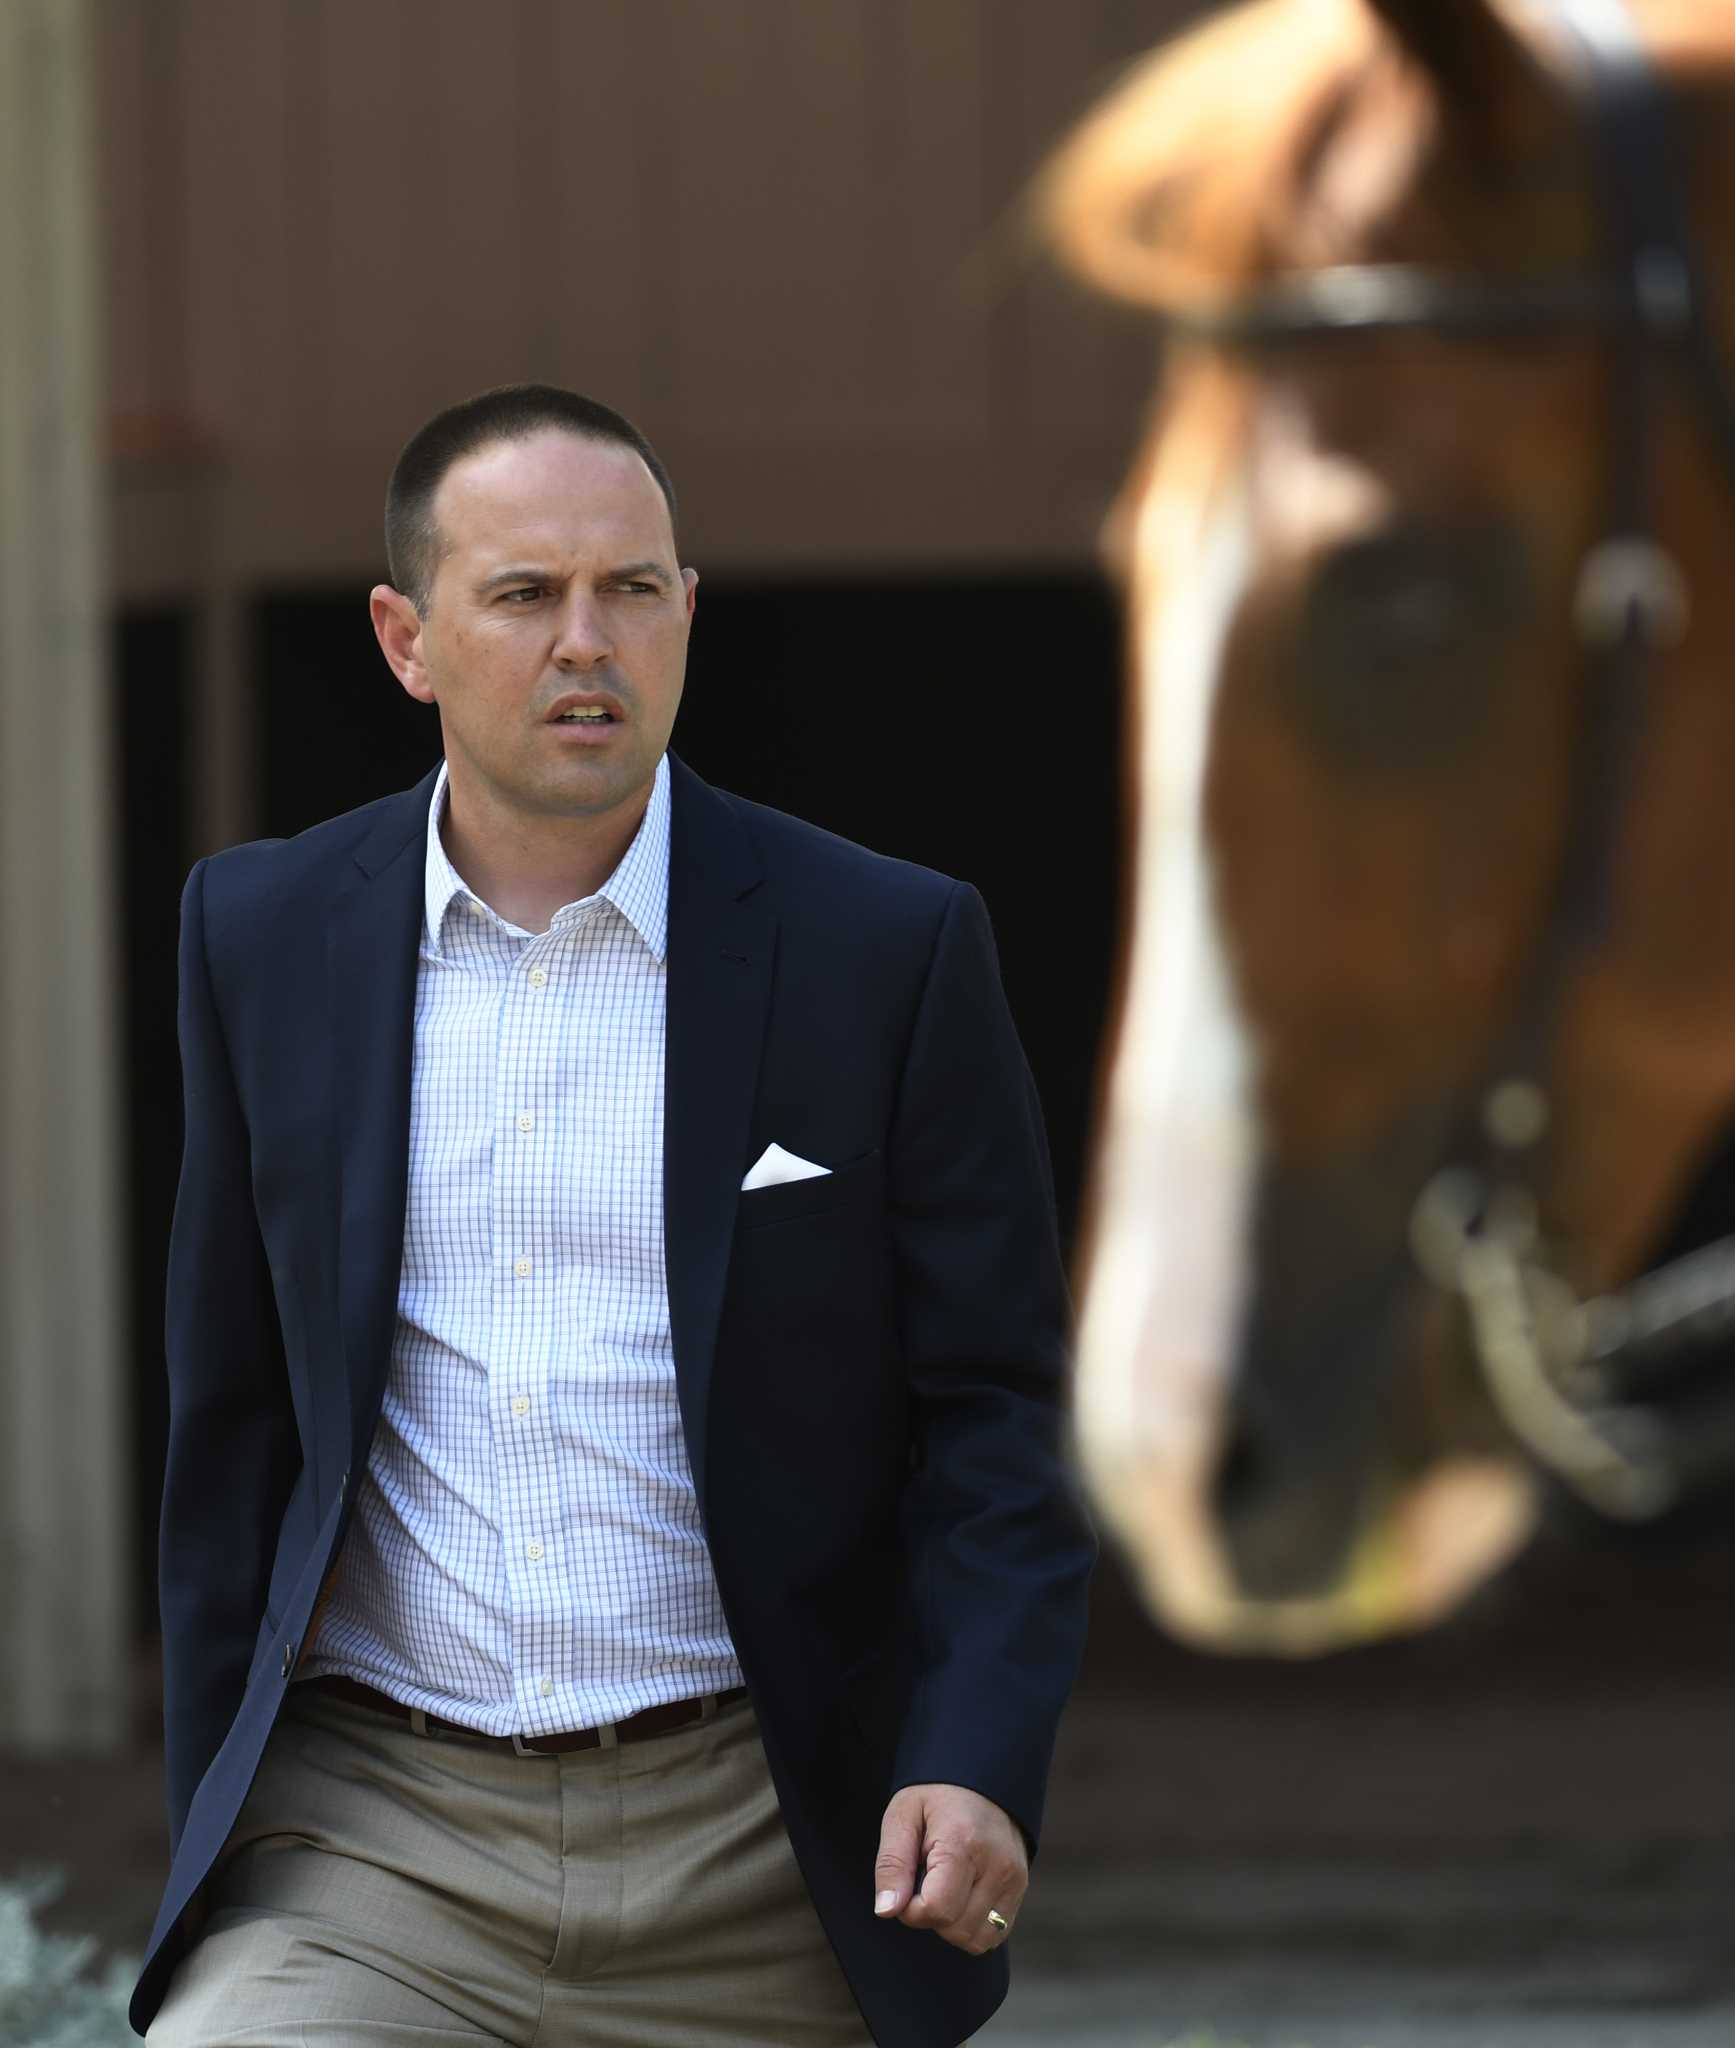 Saratoga horse trainer agrees to repay 1.6 million in back wages, overtime